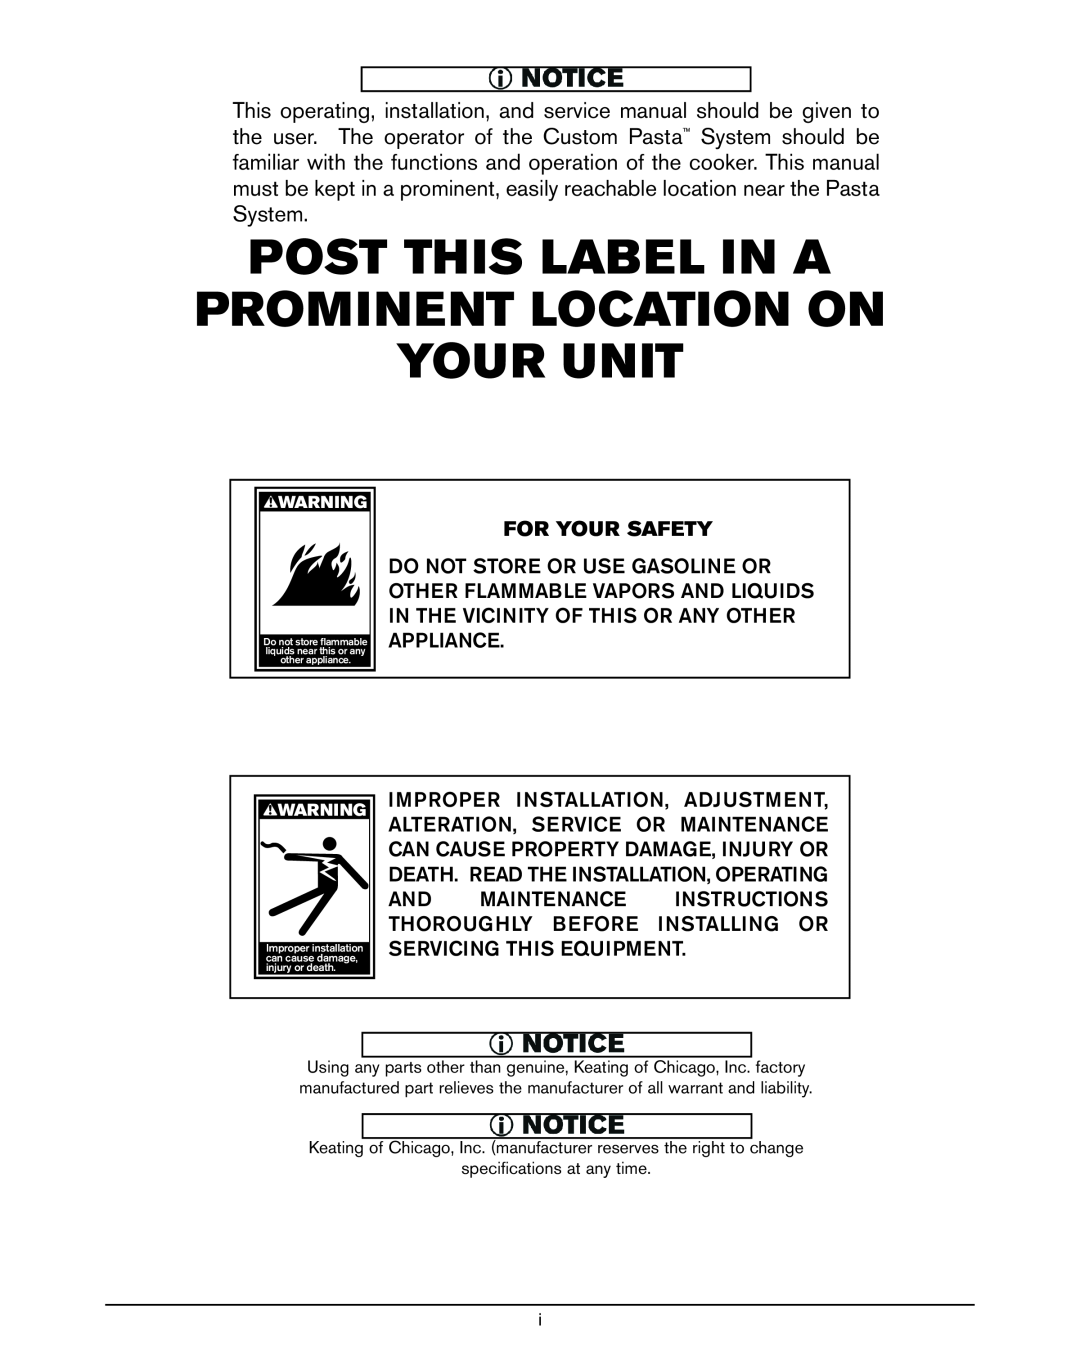 Keating Of Chicago 240V service manual For Your Safety, Post This Label In A Prominent Location On Your Unit 